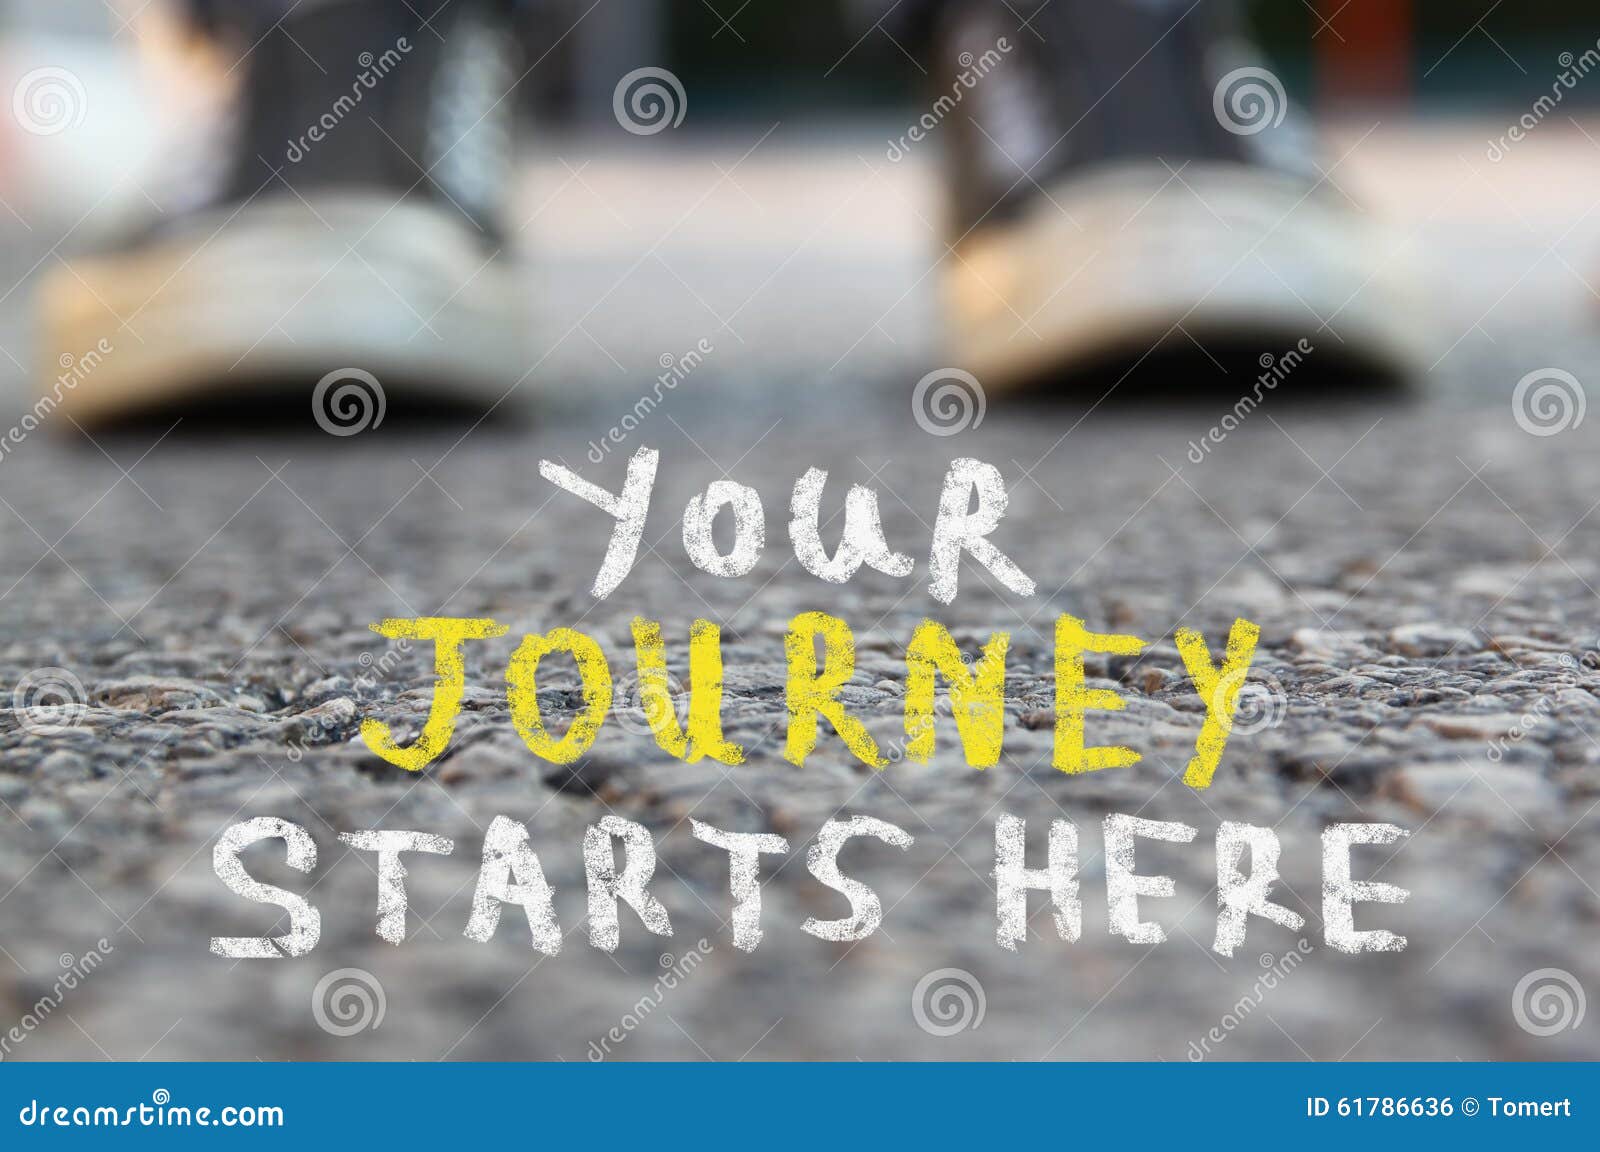 image with selective focus over asphalt road and person with handwritten text - your journey starts here. education and motivation